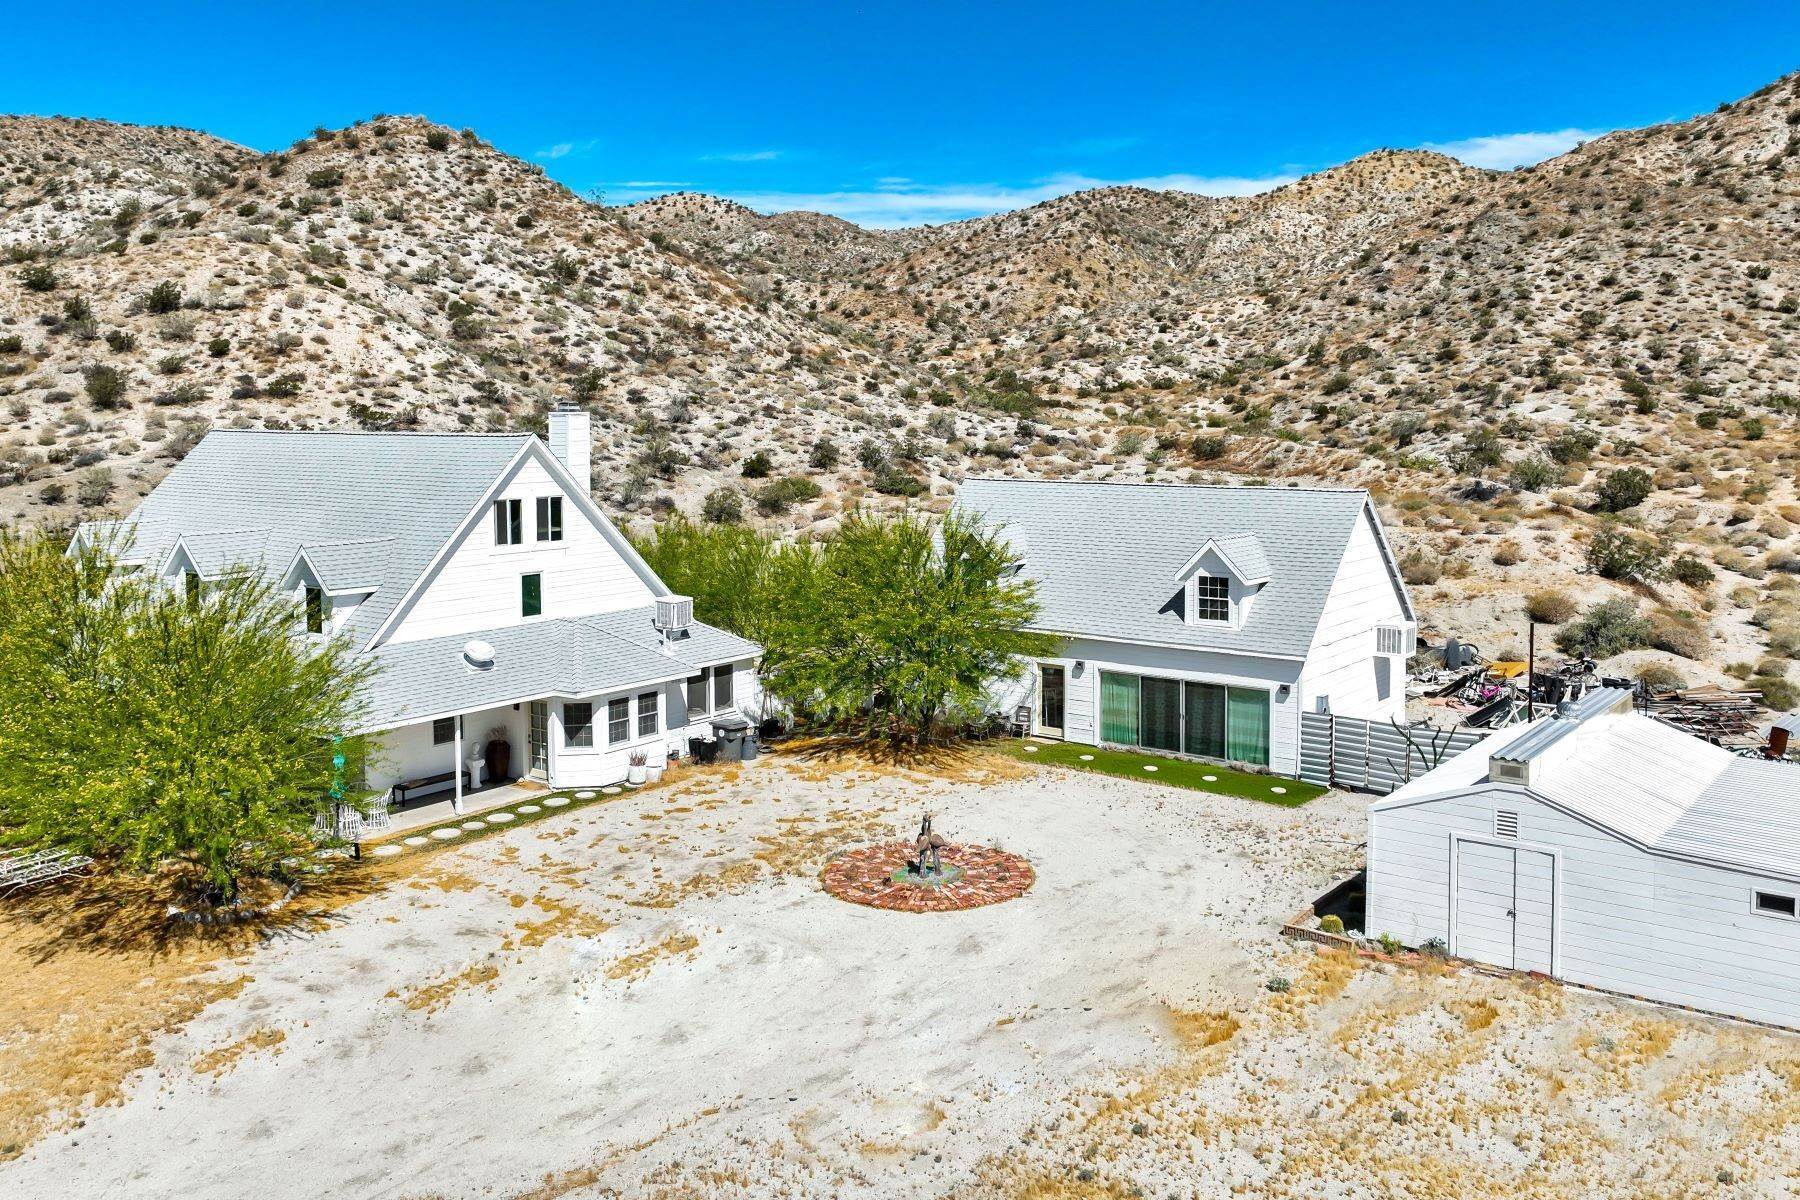 Single Family Homes for Active at New England style 2 story home sitting on 93 acres comes to the Coachella Valley 7895 Annandale Avenue Desert Hot Springs, California 92240 United States